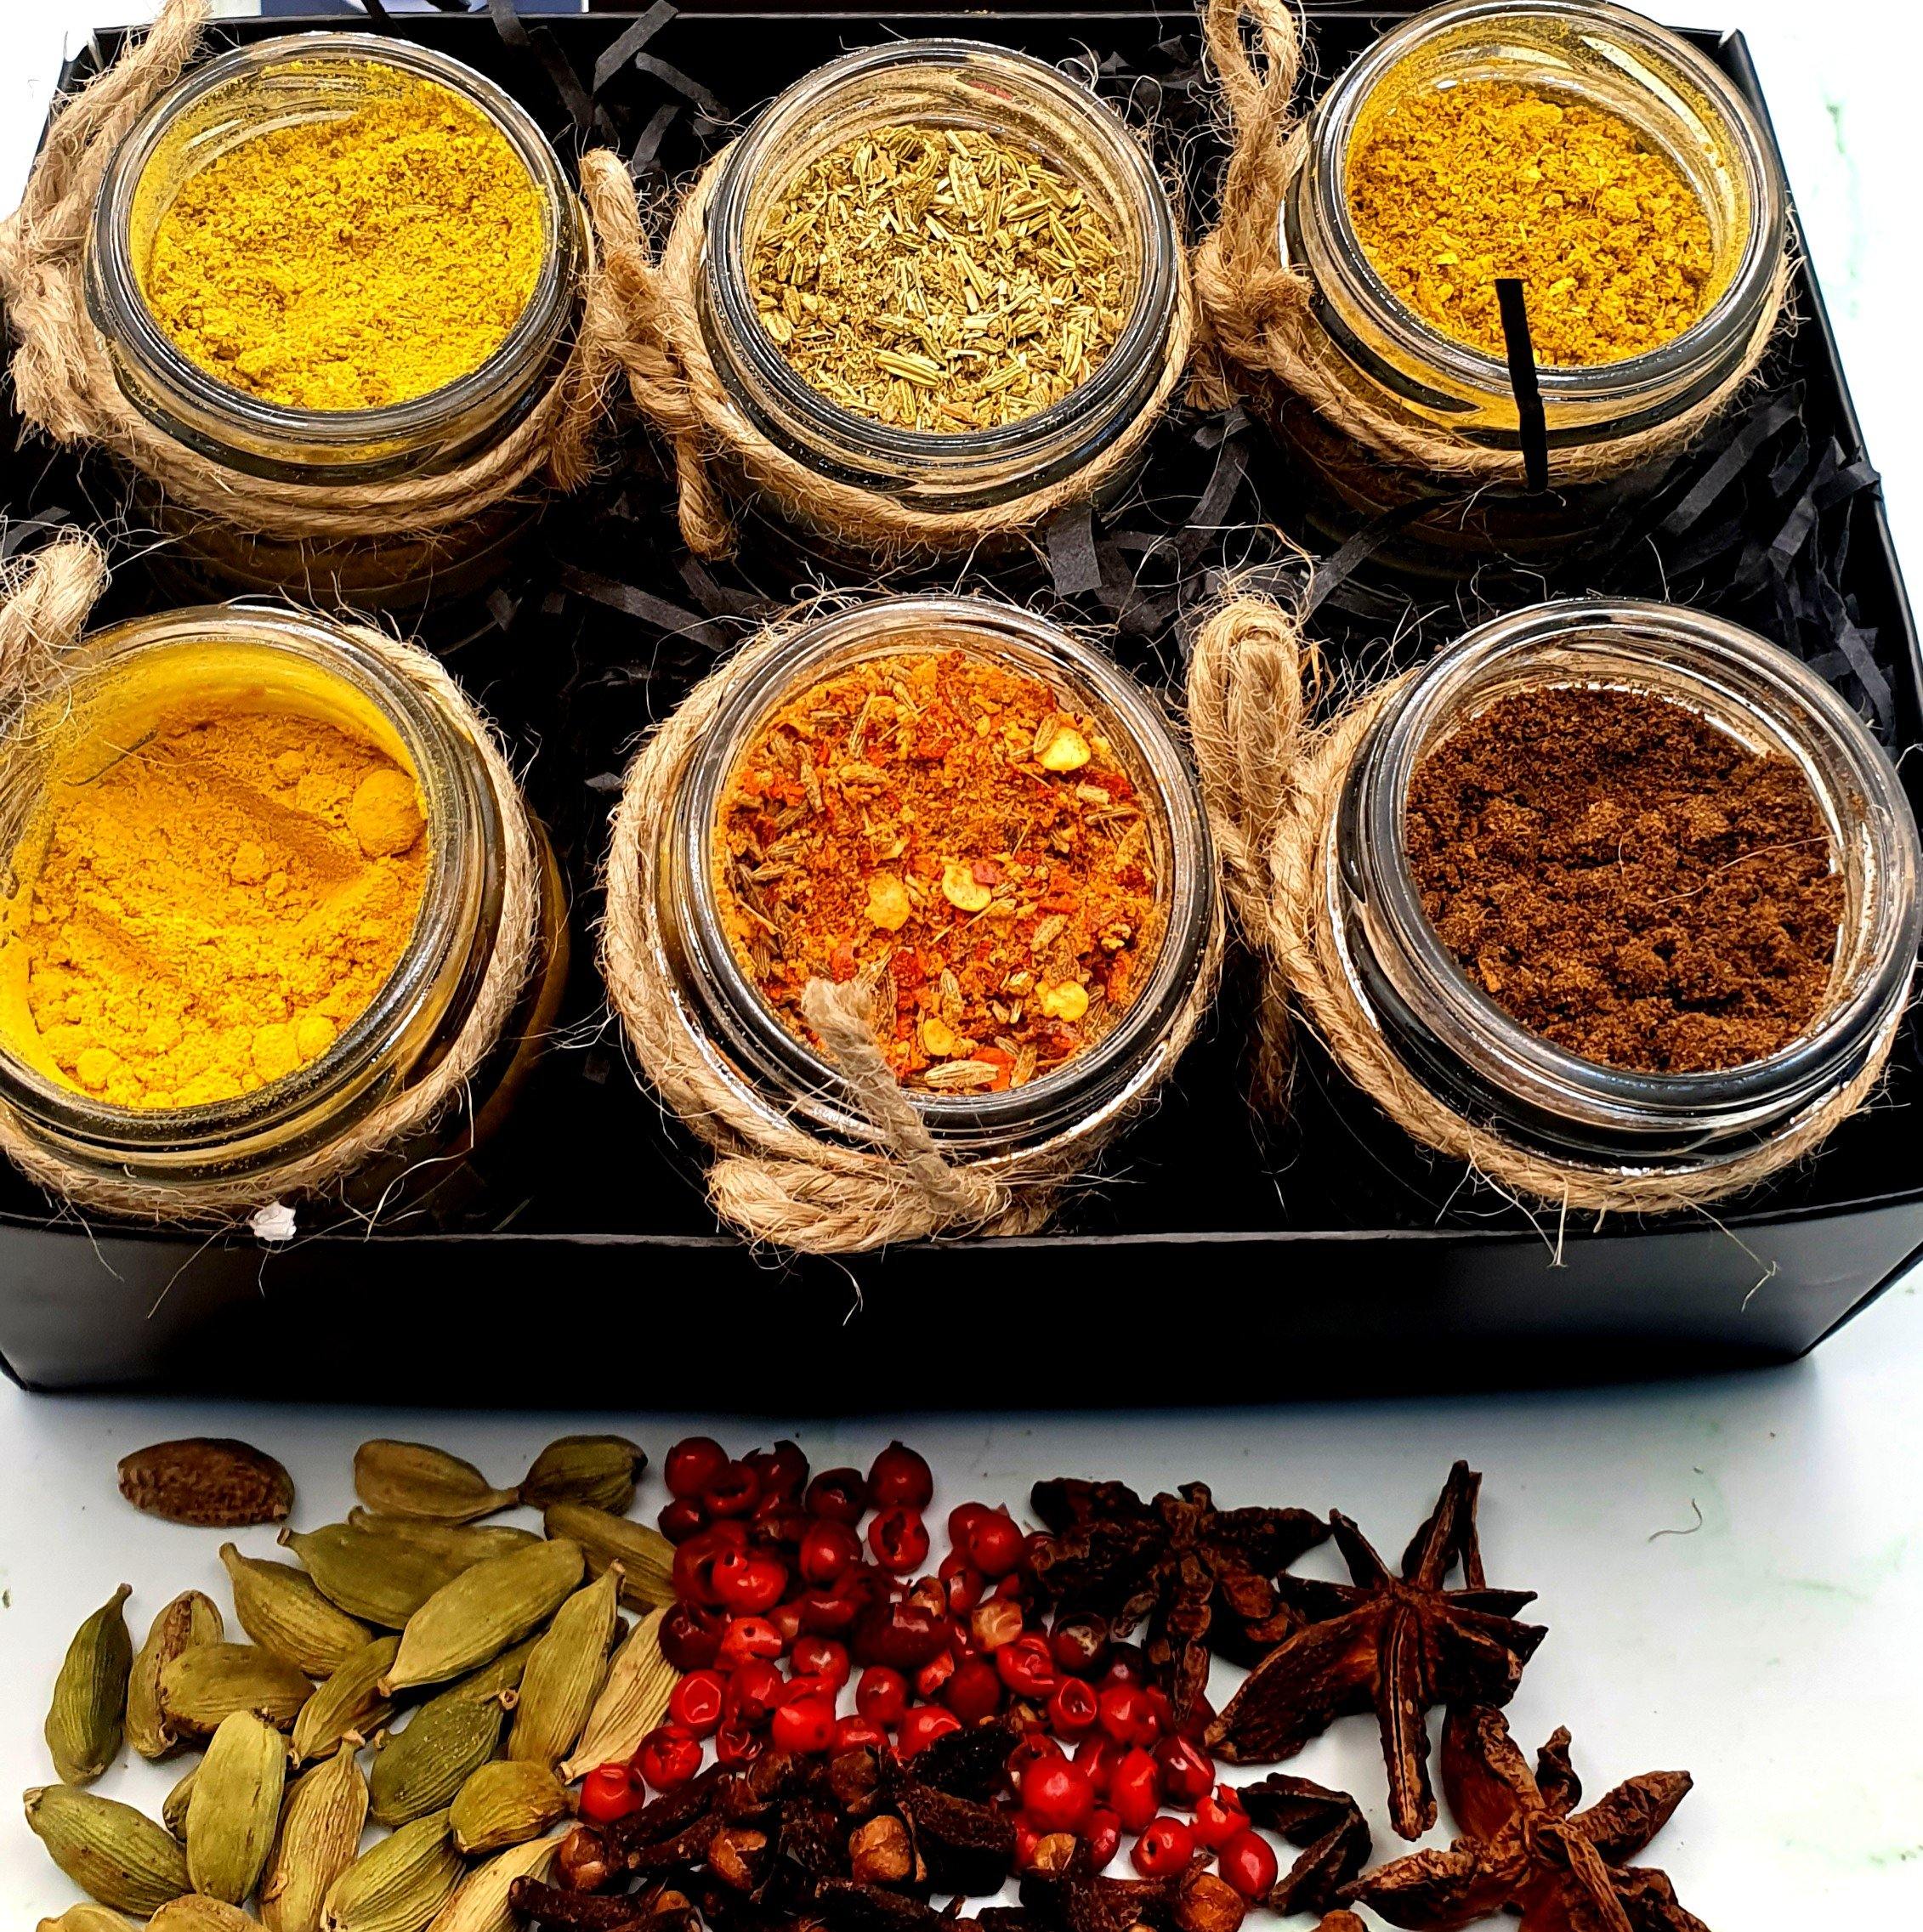 Spice subscription box | Spice subscription Gift